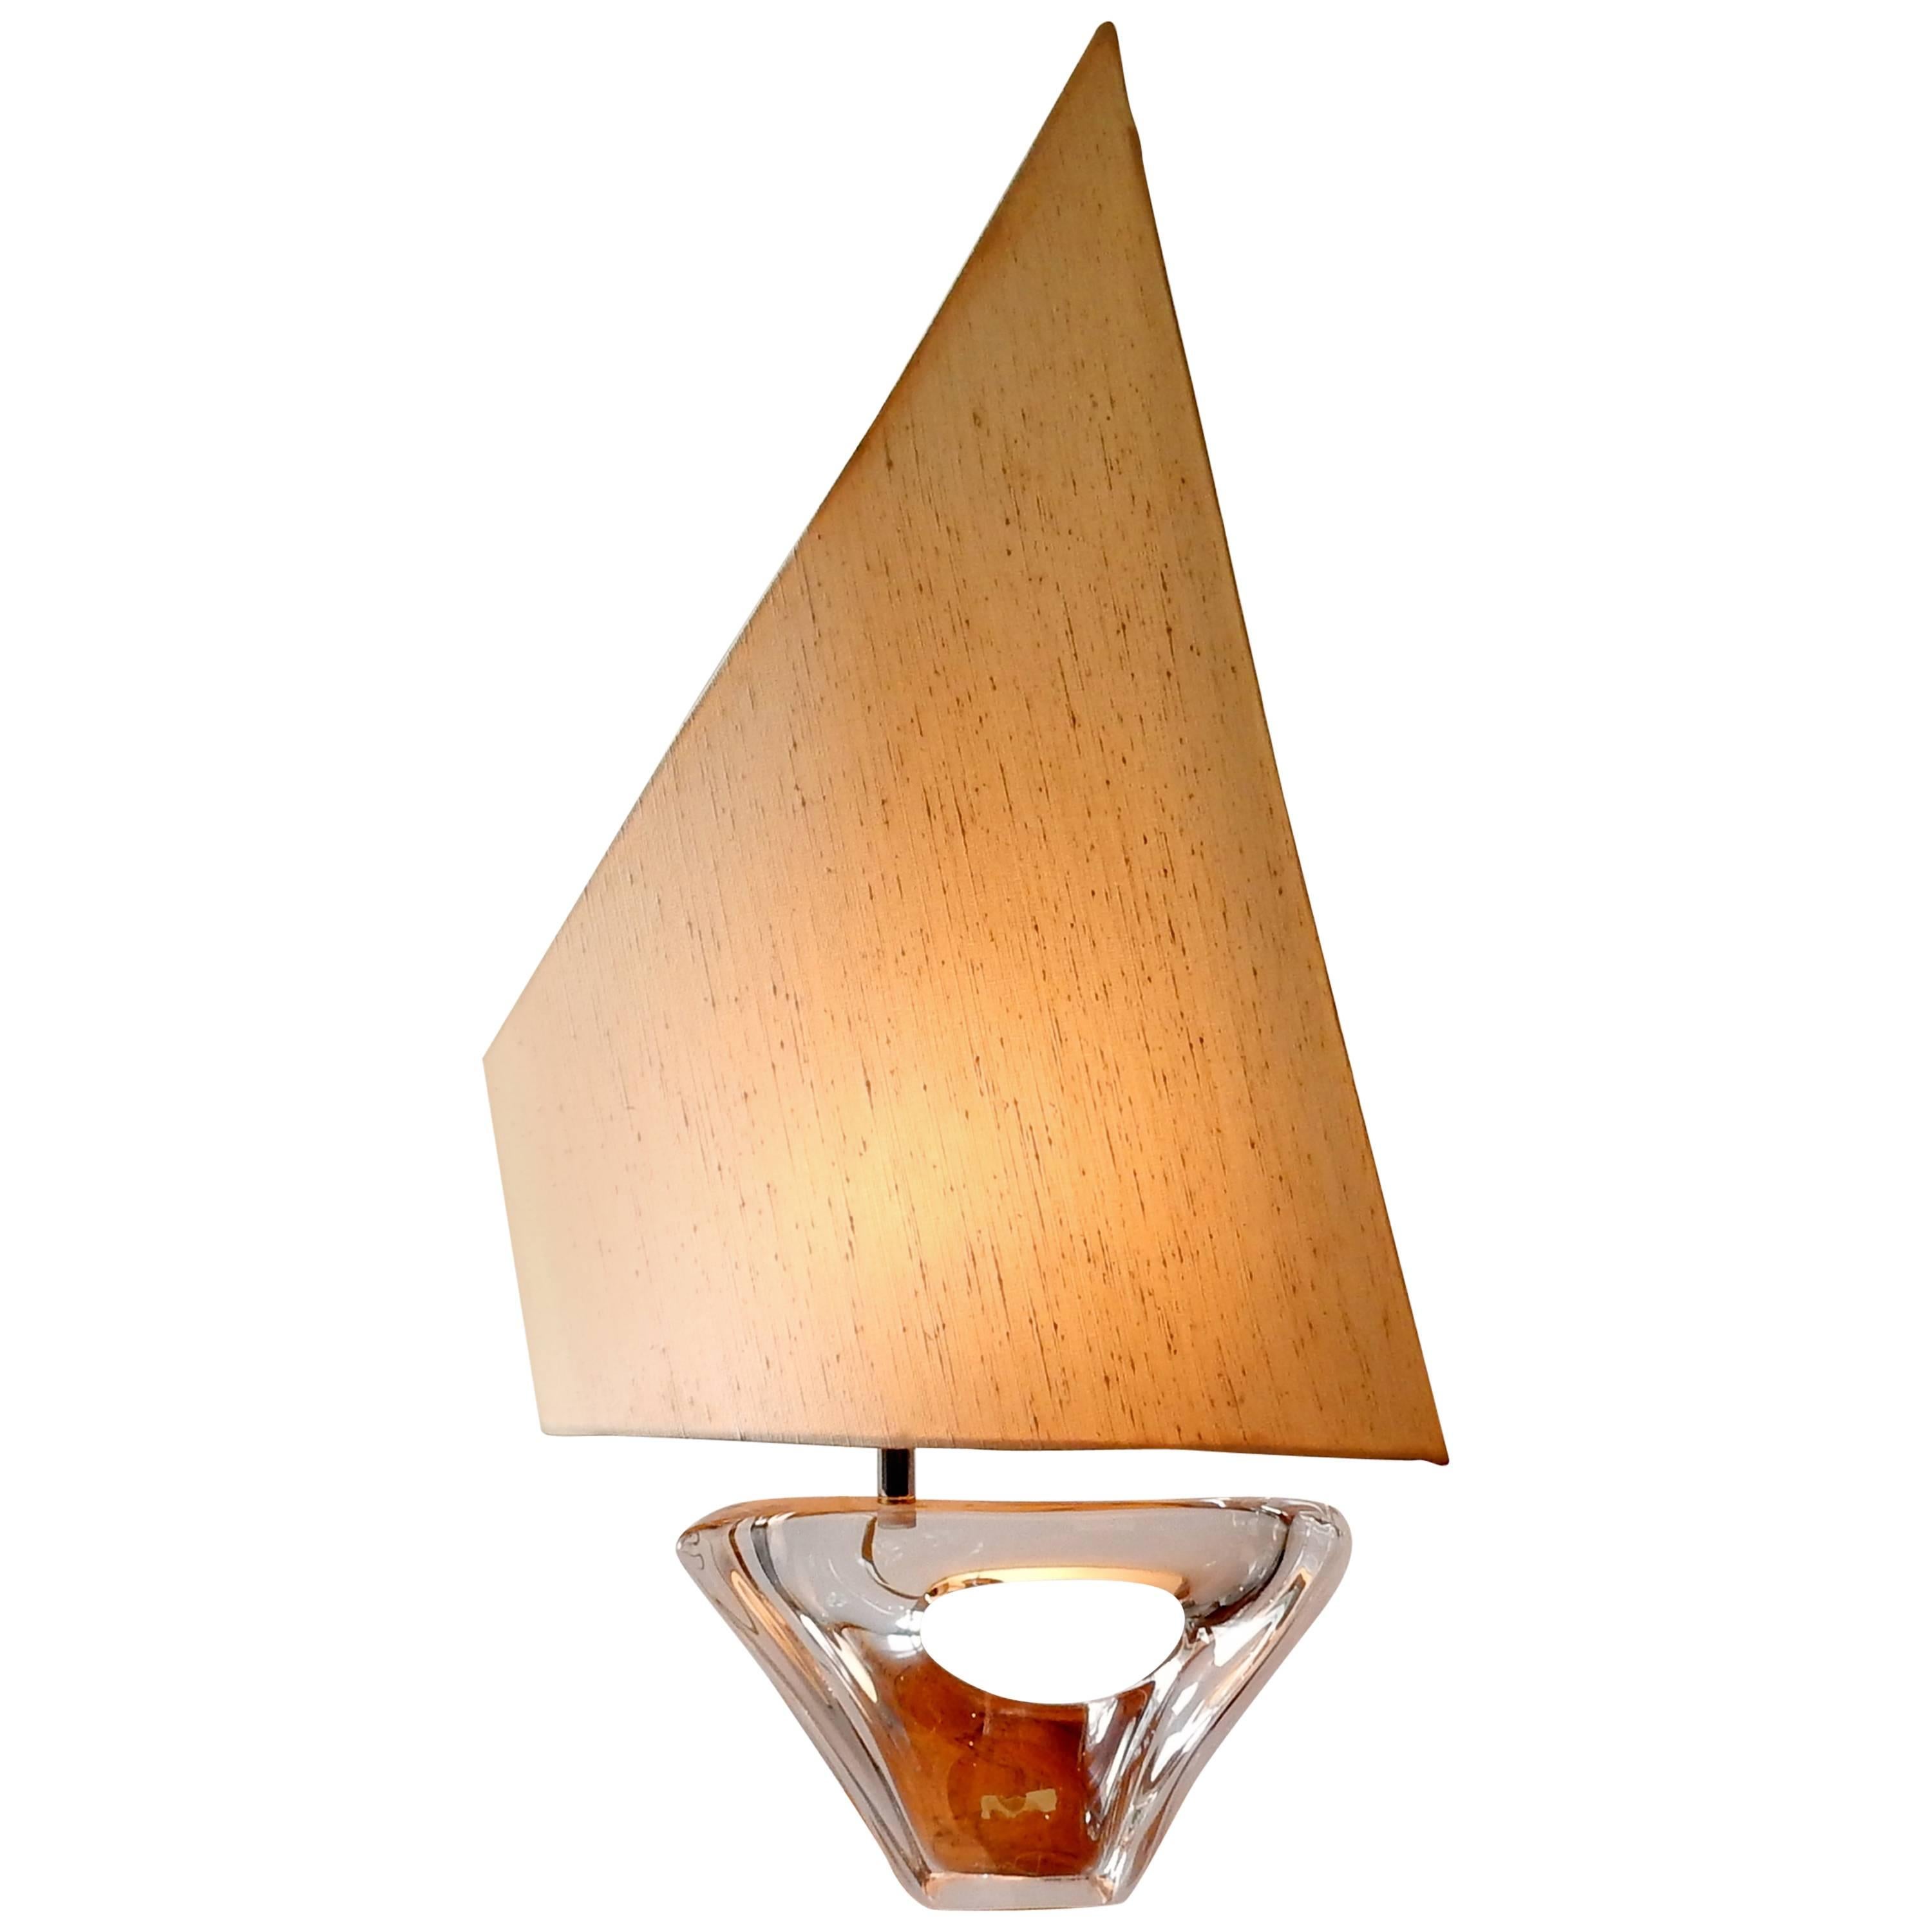 Sailboat Shaped Table Light by Daum, Signed and Labelled, France, 1950s